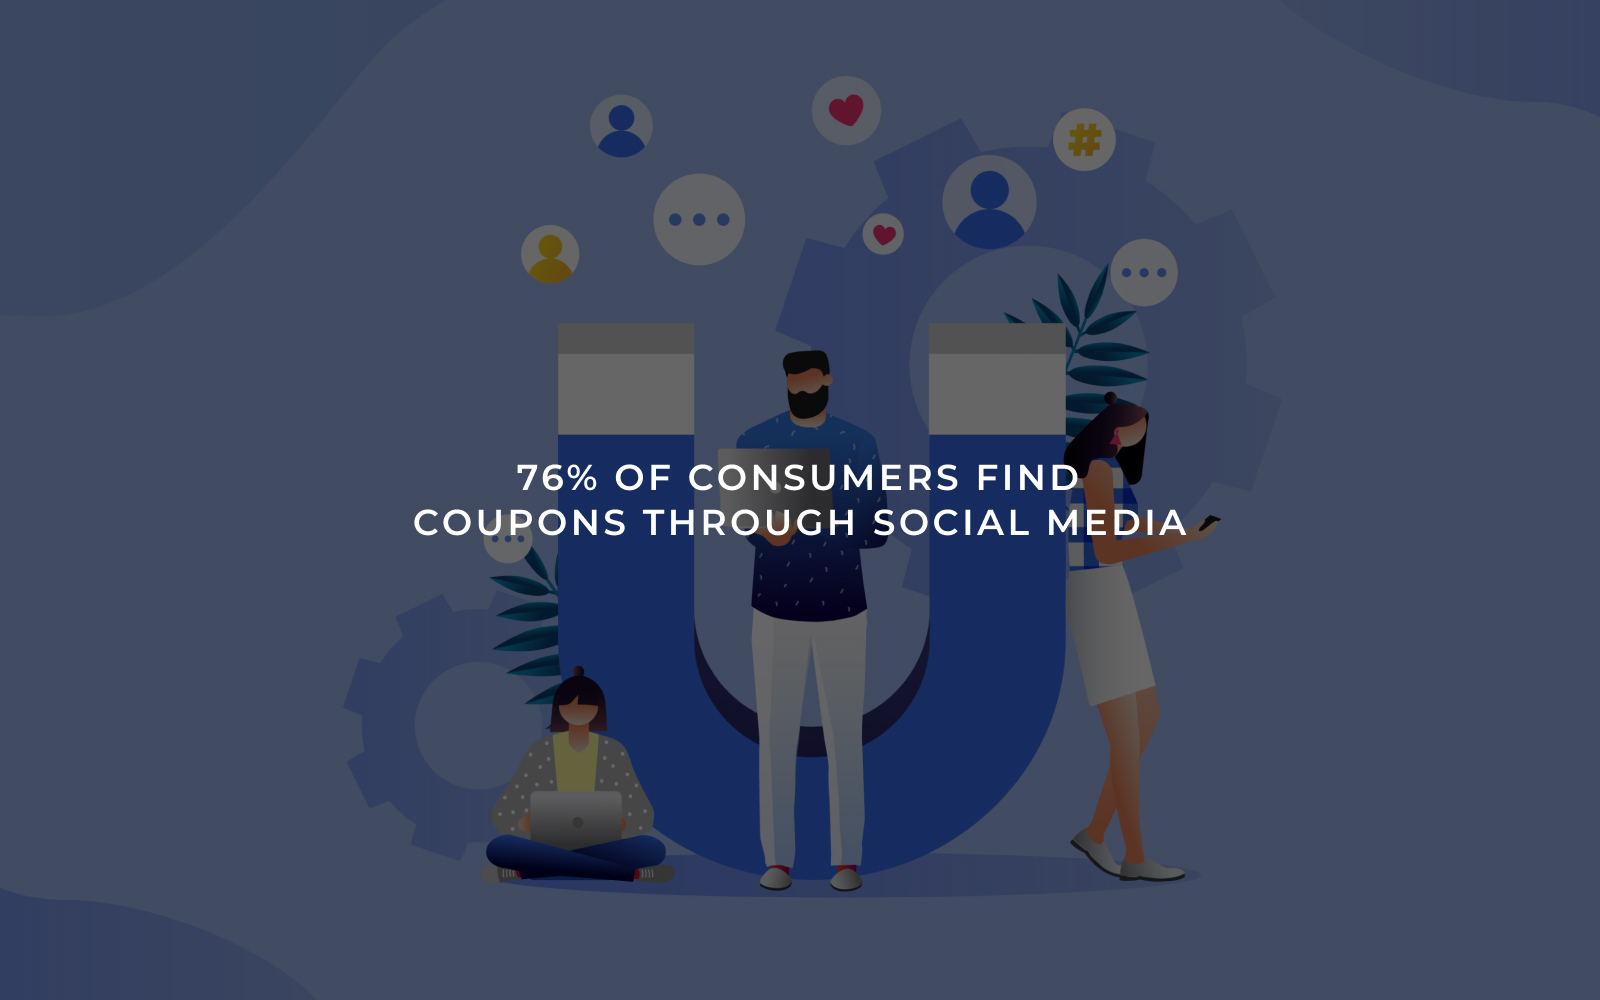 Statistic on social media coupons